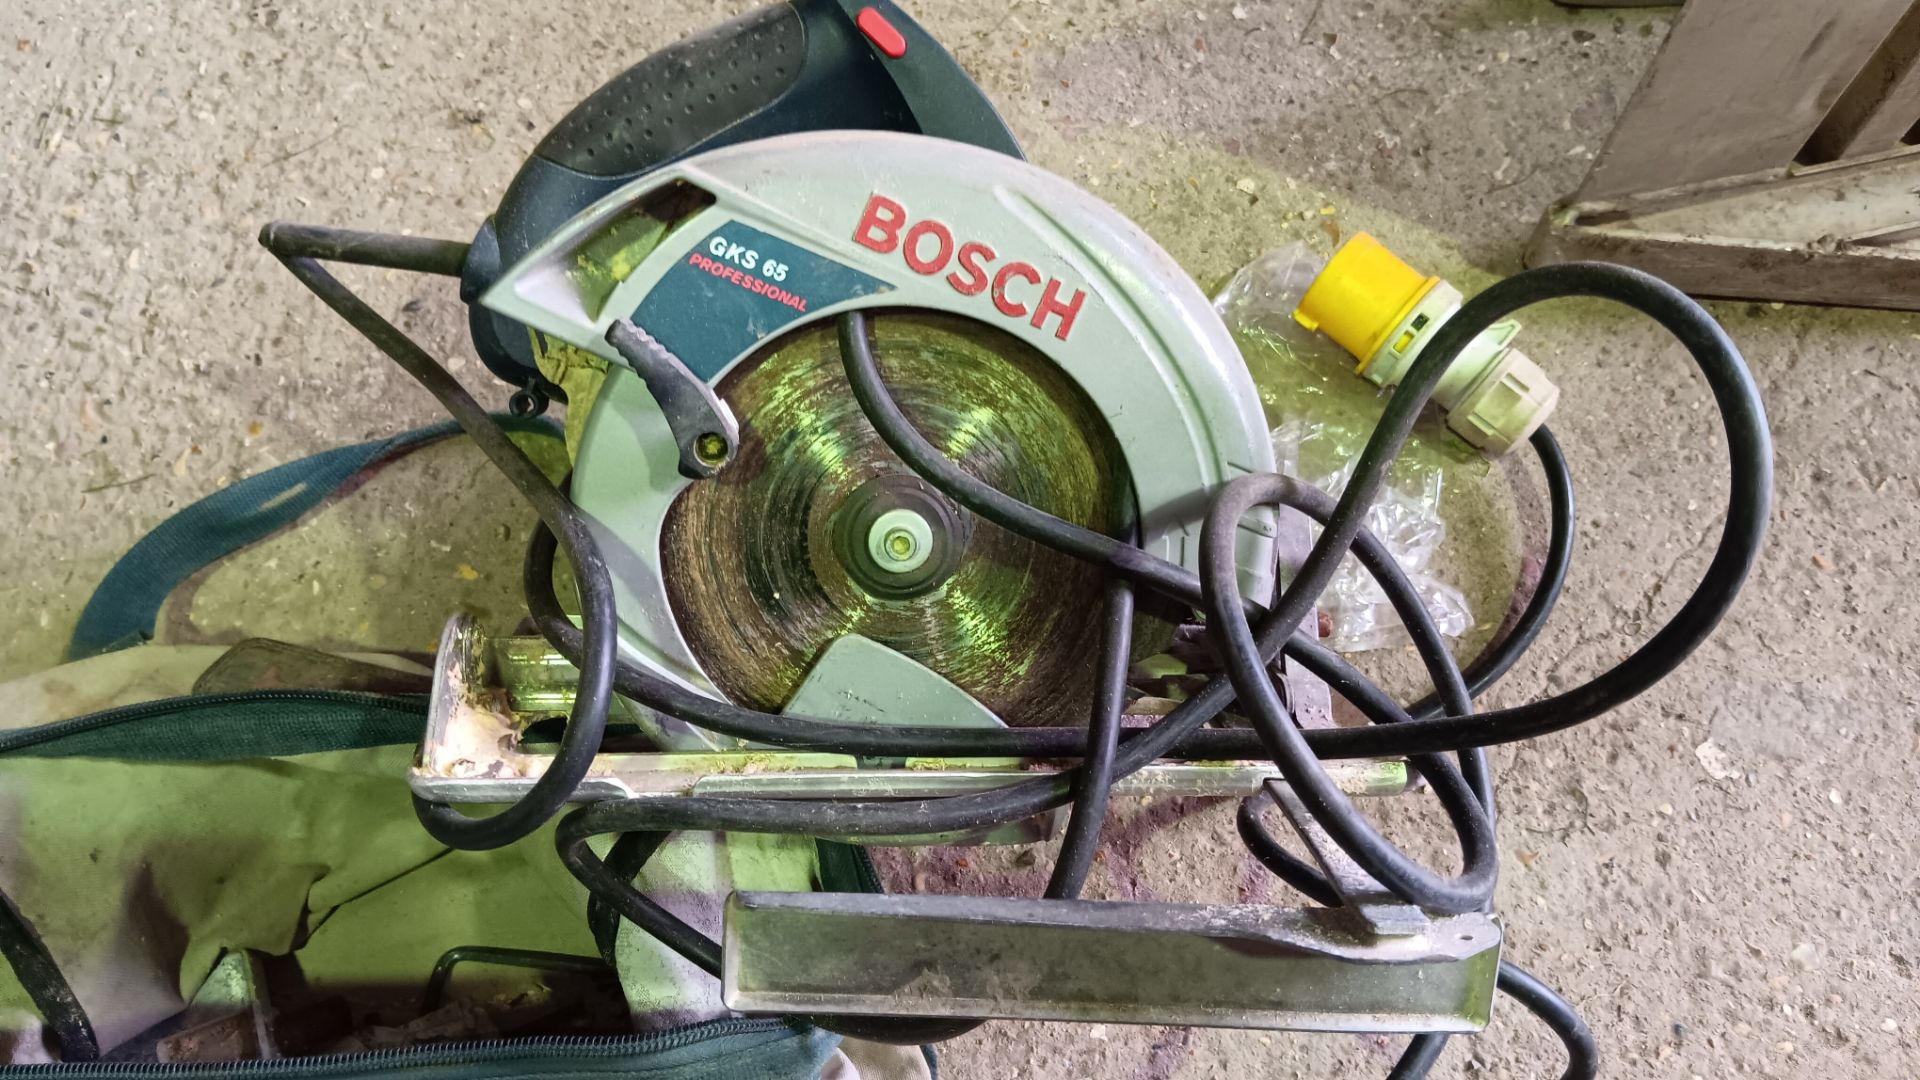 Bosch GKS65 Professional 190mm circular saw with bag, 110v, serial number 763000840 (2007) - Image 2 of 3